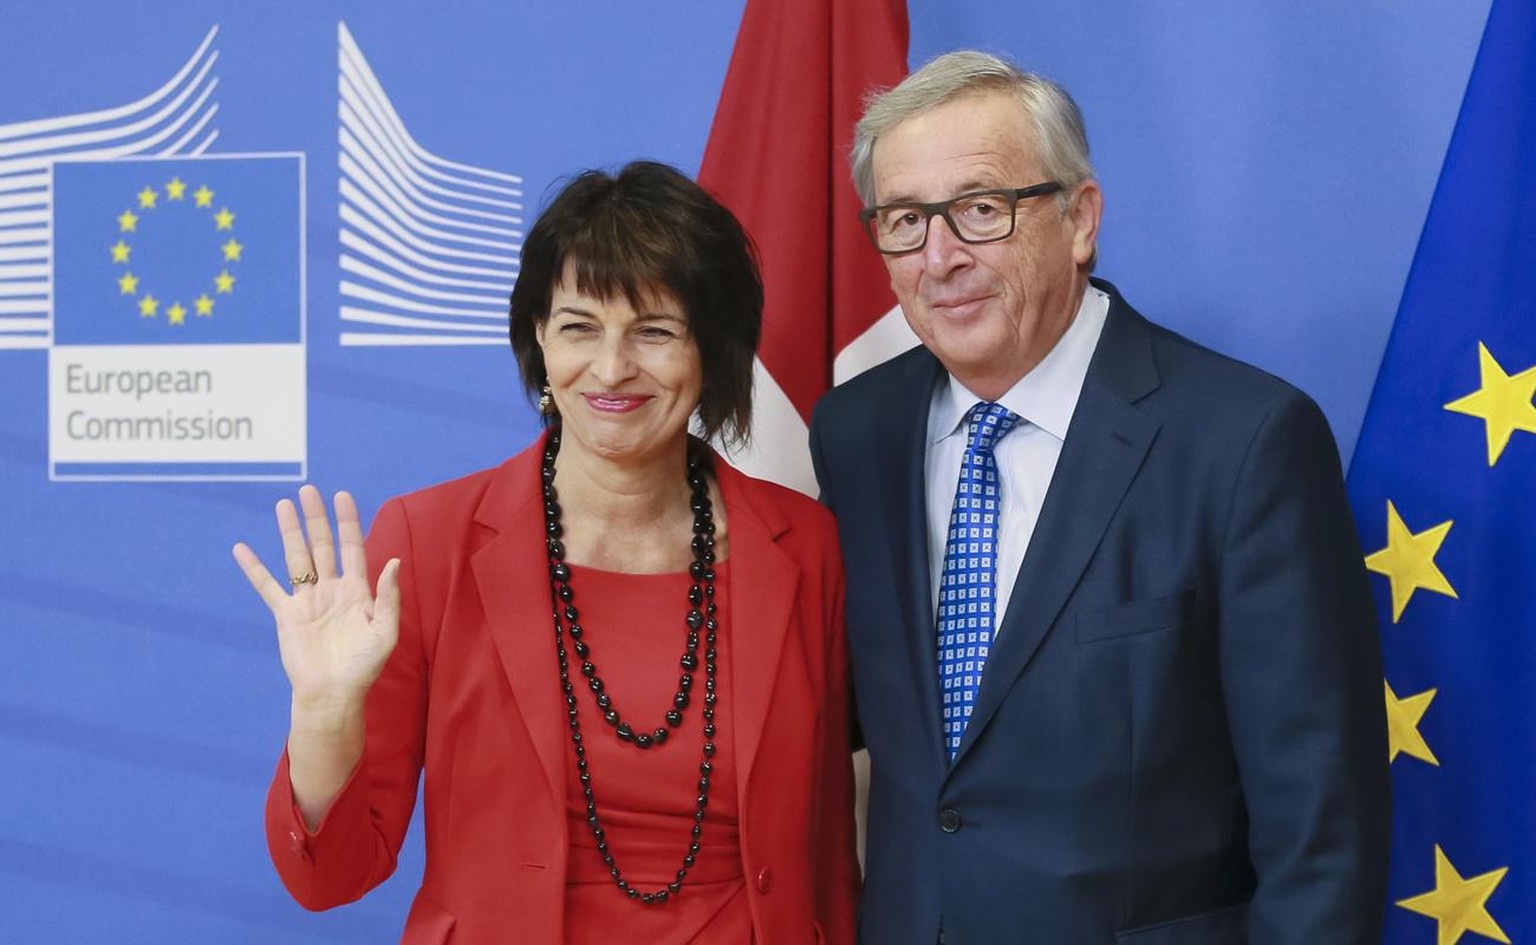 epa05891475 EU commission President Jean-Claude Juncker (R) welcomes the President of the Swiss Confederation Doris Leuthard (L), prior to a meeting in Brussels, Belgium, 06 April 2017. EPA/OLIVIER HO ...